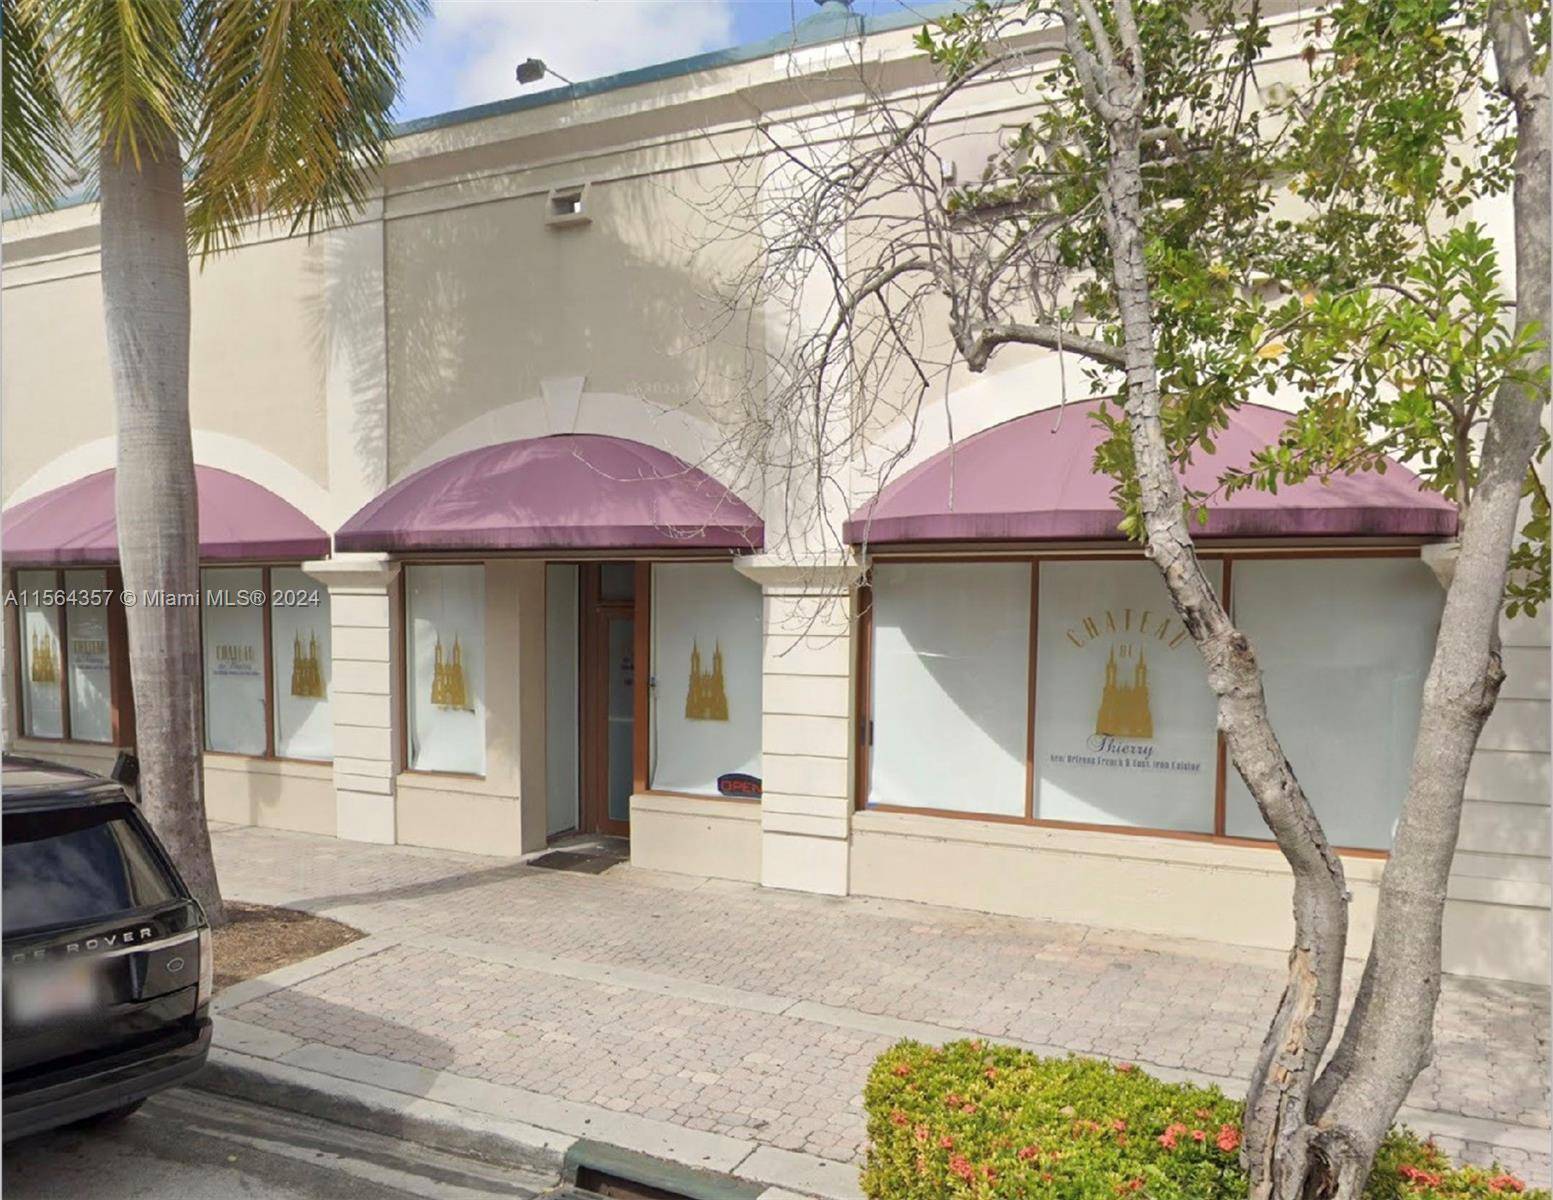 Located in the heart of Downtown Hollywood, this A location offers unparalleled convenience and visibility for your business ventures.